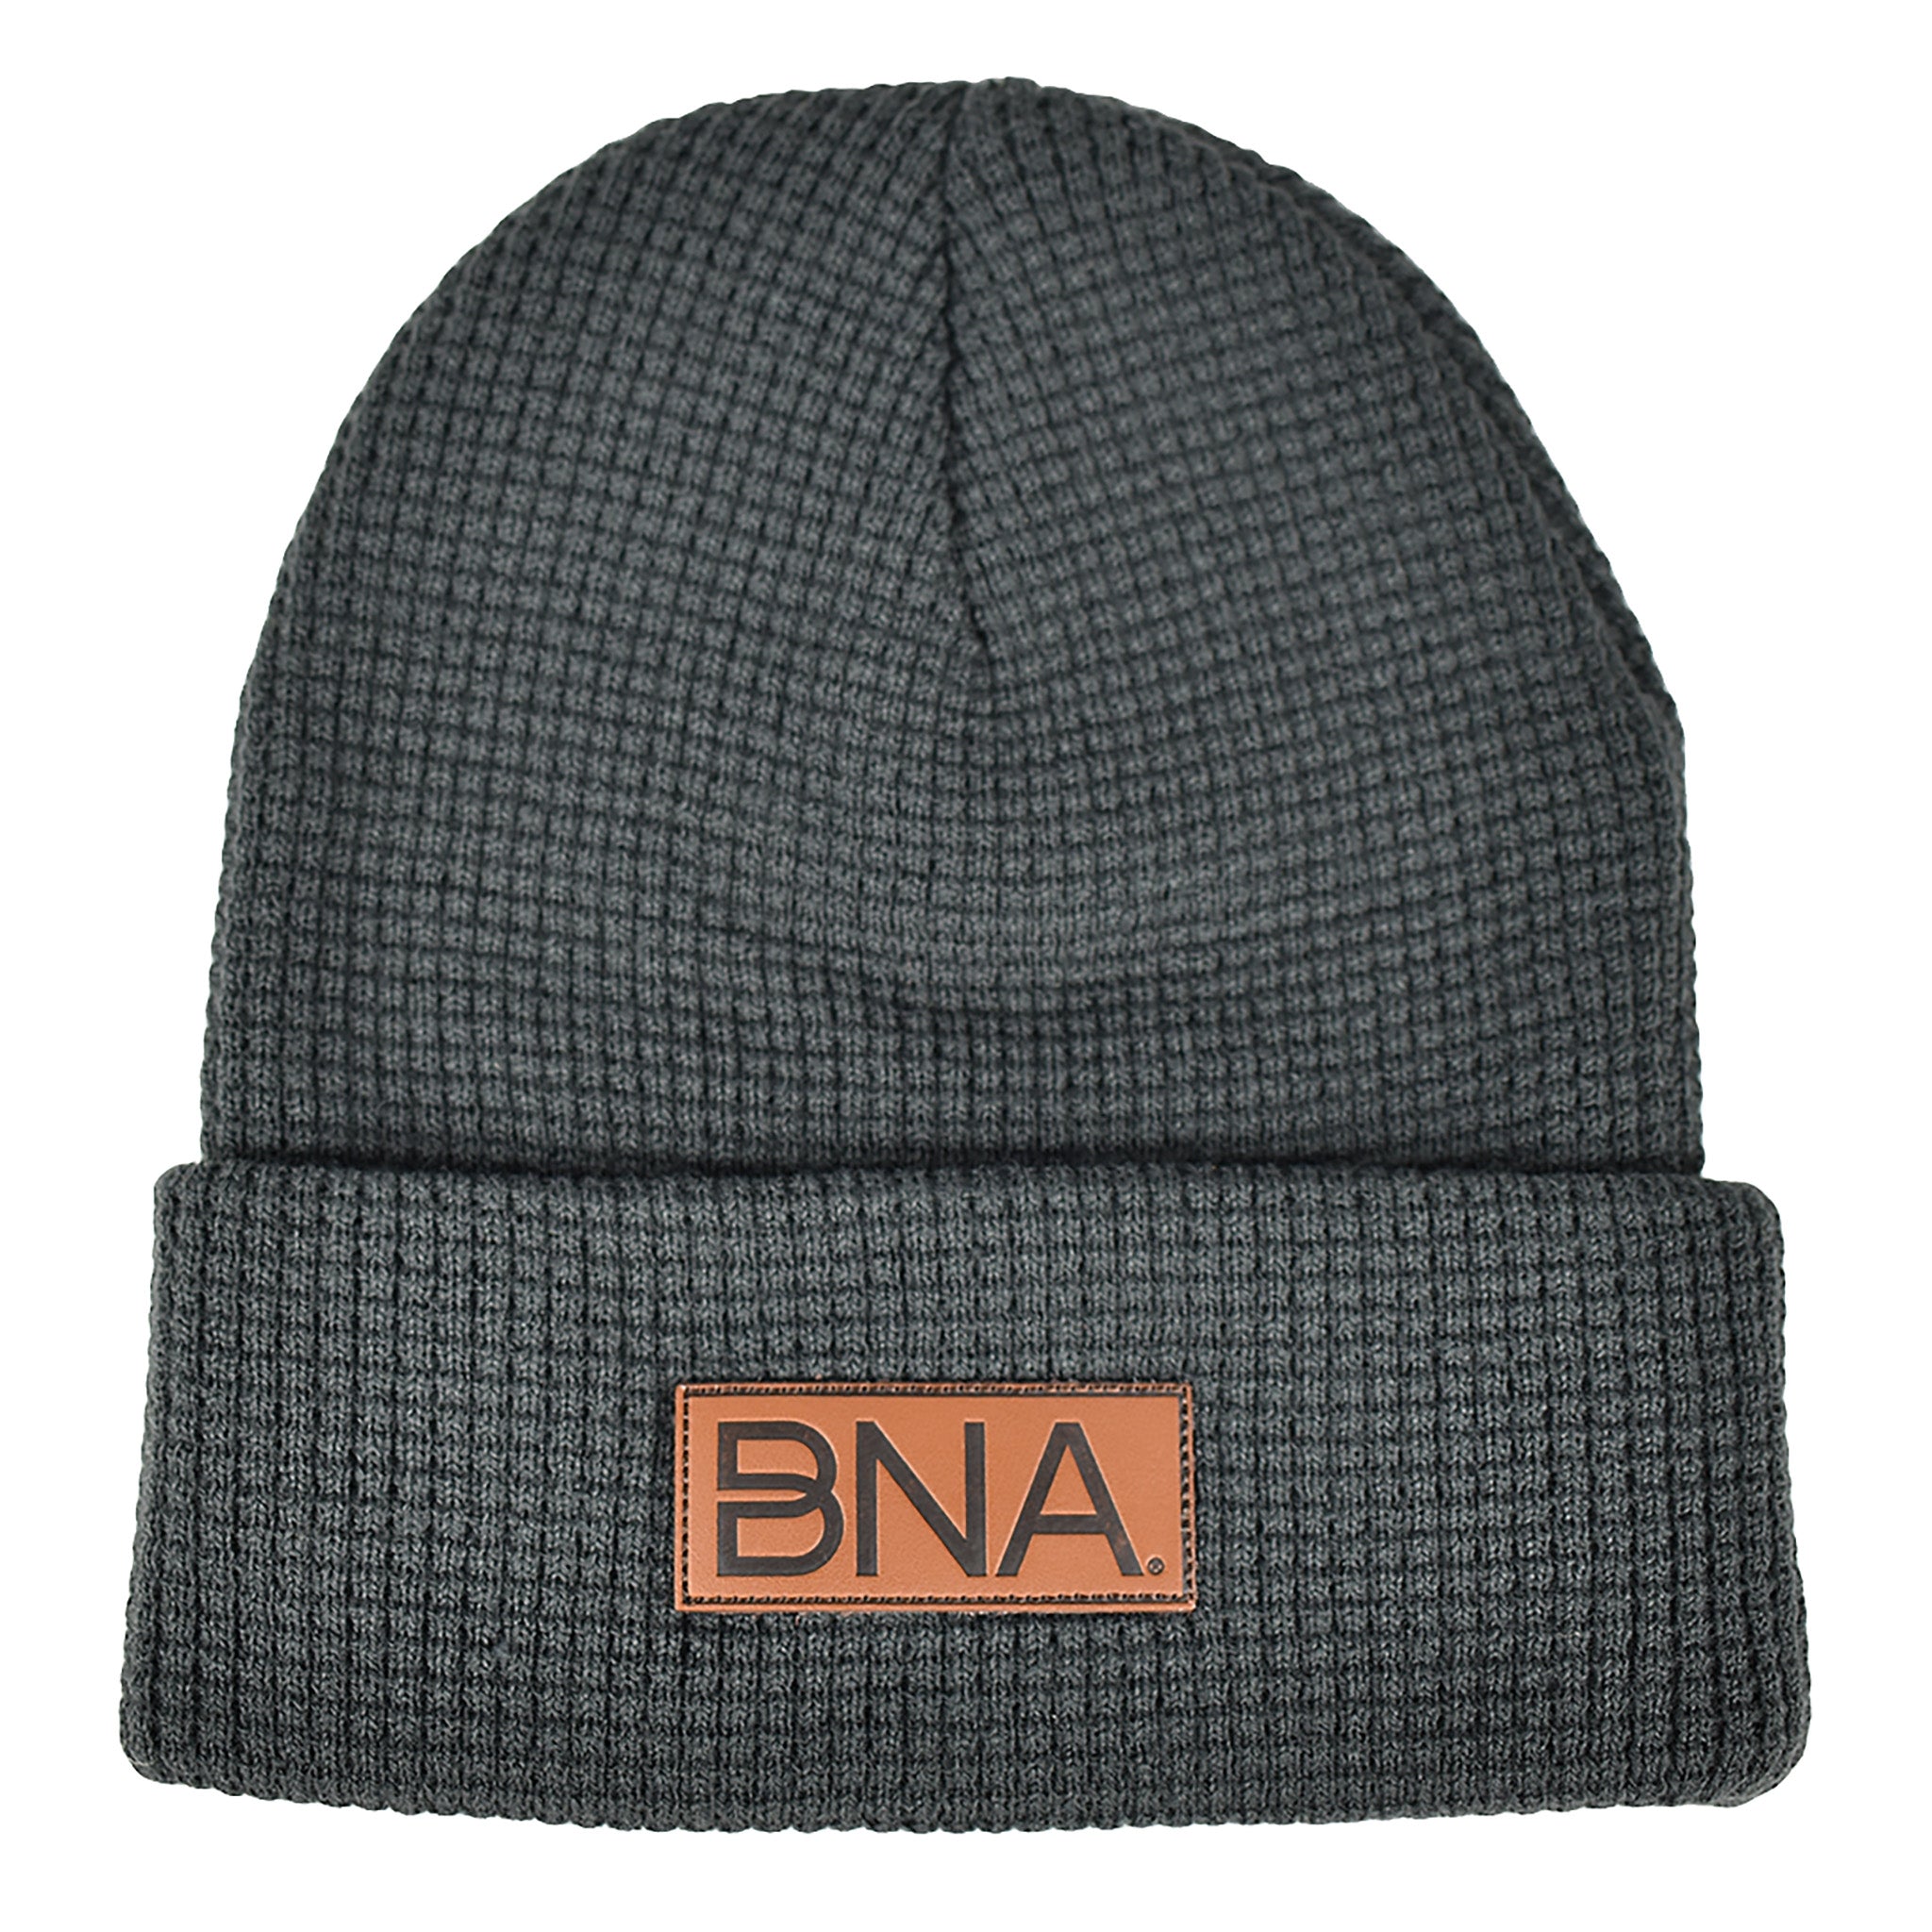 Charcoal gray waffle knit beanie with brown faux leather patch on cuff.  Patch features debossed BNA logo.